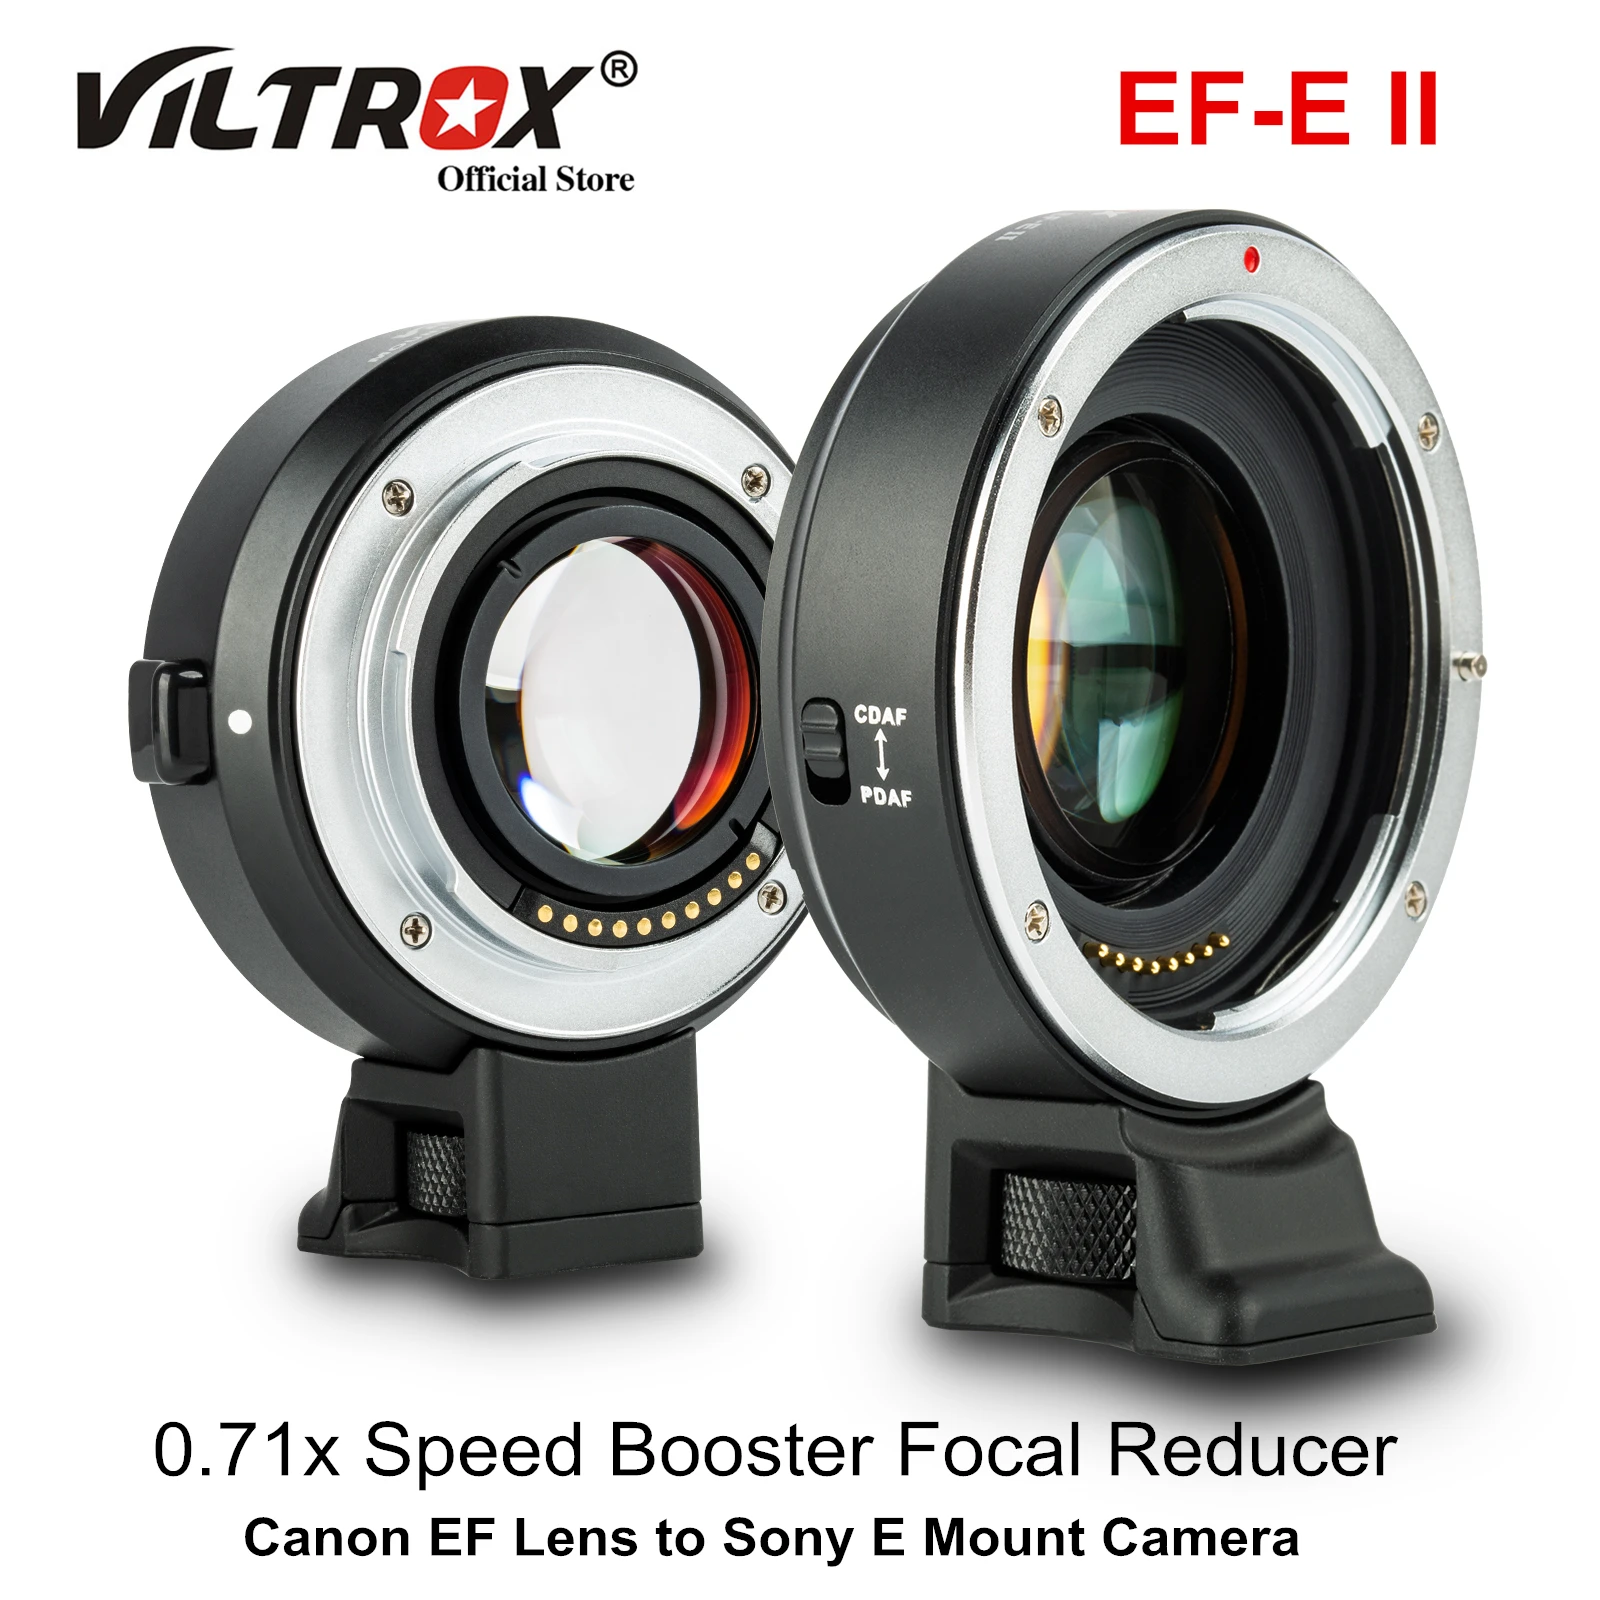 

Viltrox EF-E II Lens Adapter Auto Focus Reducer Speed Booster 0.71X for Canon EF Lens to Sony E Mount Camera A9 A7II A7RII A6400